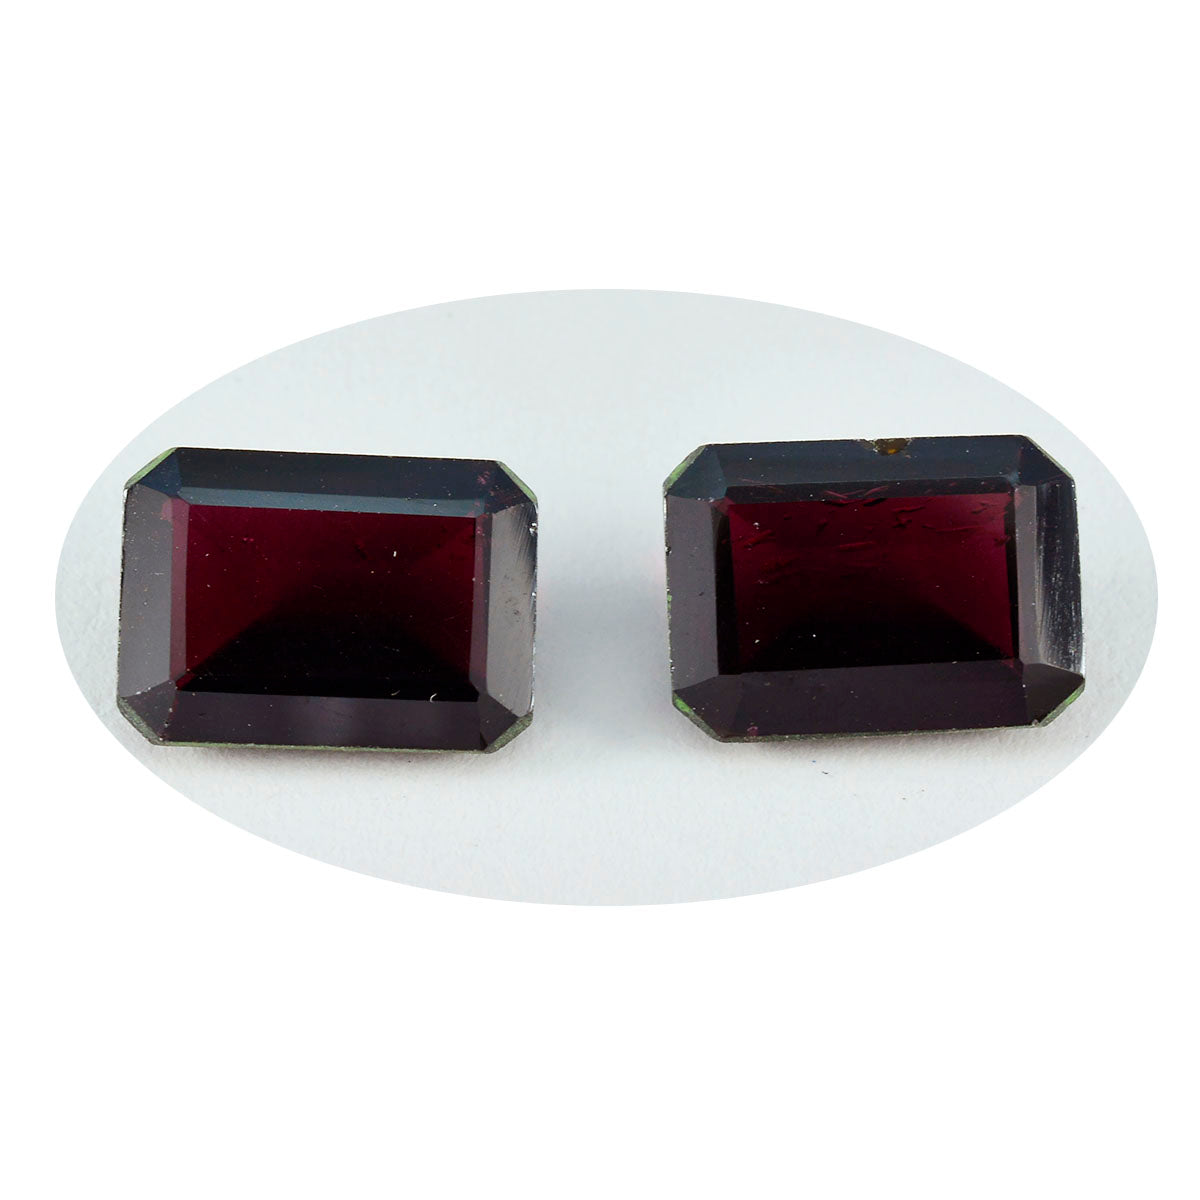 Riyogems 1PC Real Red Garnet Faceted 10X14 mm Octagon Shape handsome Quality Stone